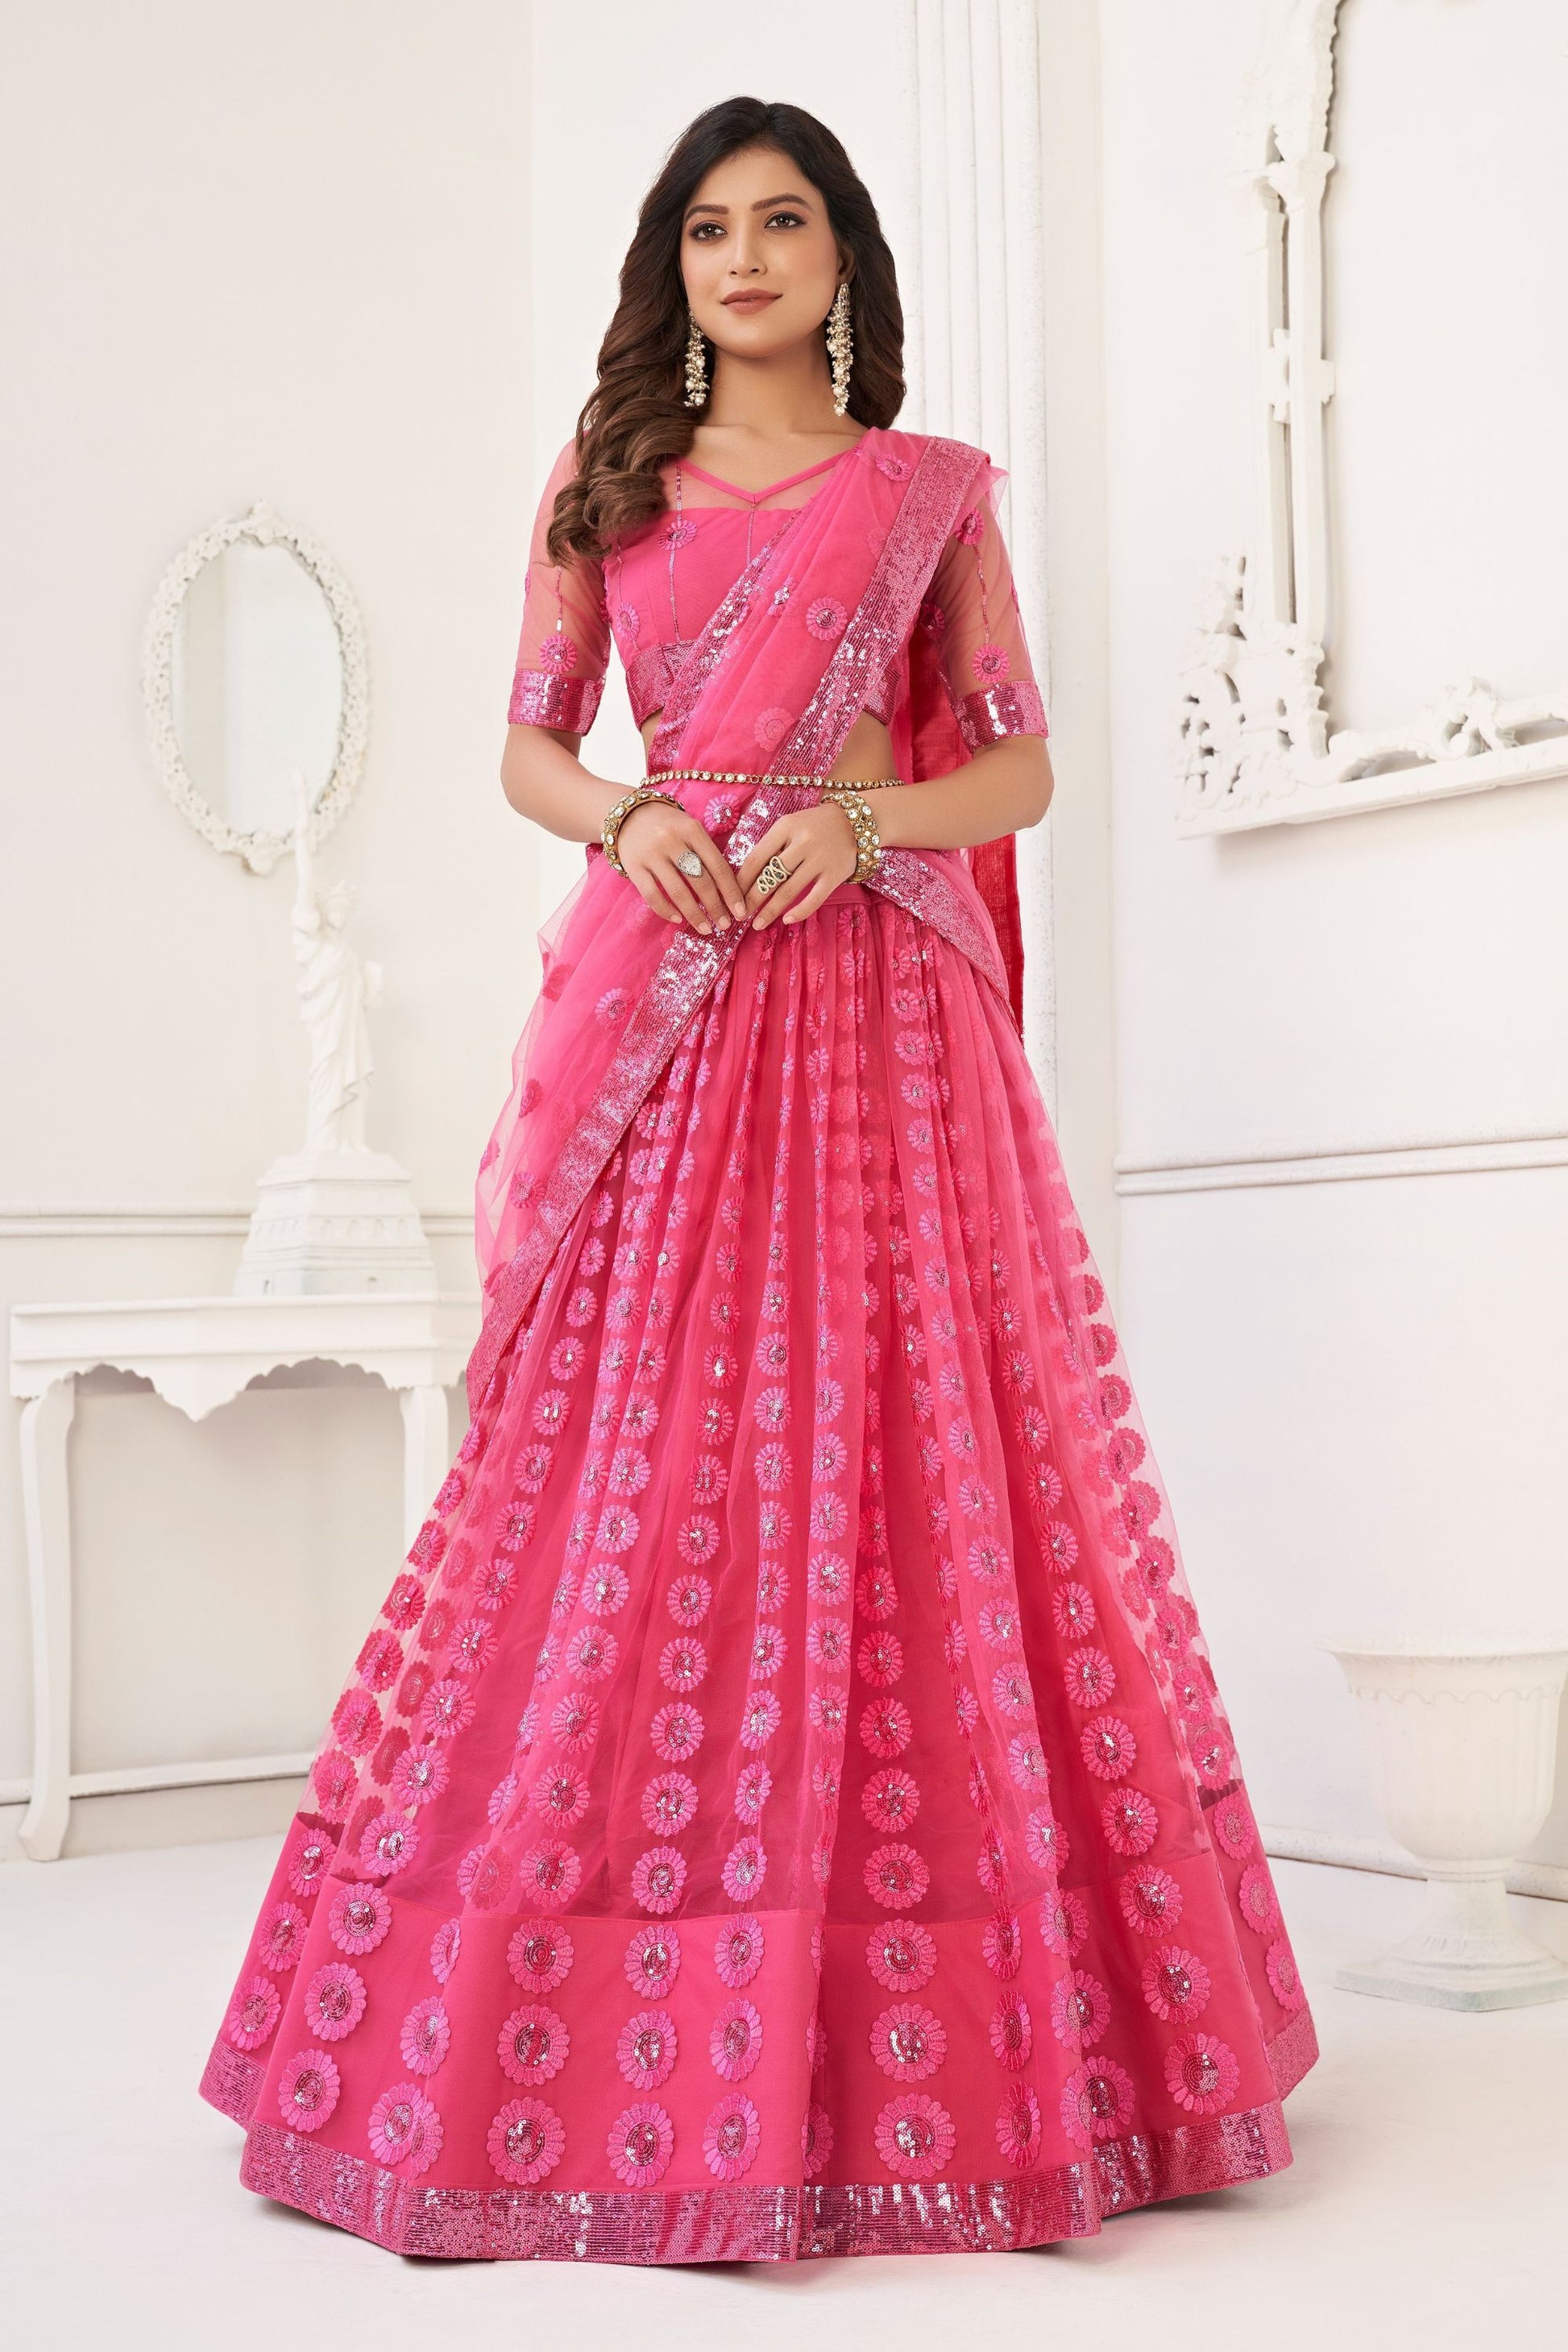 Pink Net Embroidered Lehenga Choli For Indian Festival & Weddings - Embroidery Work